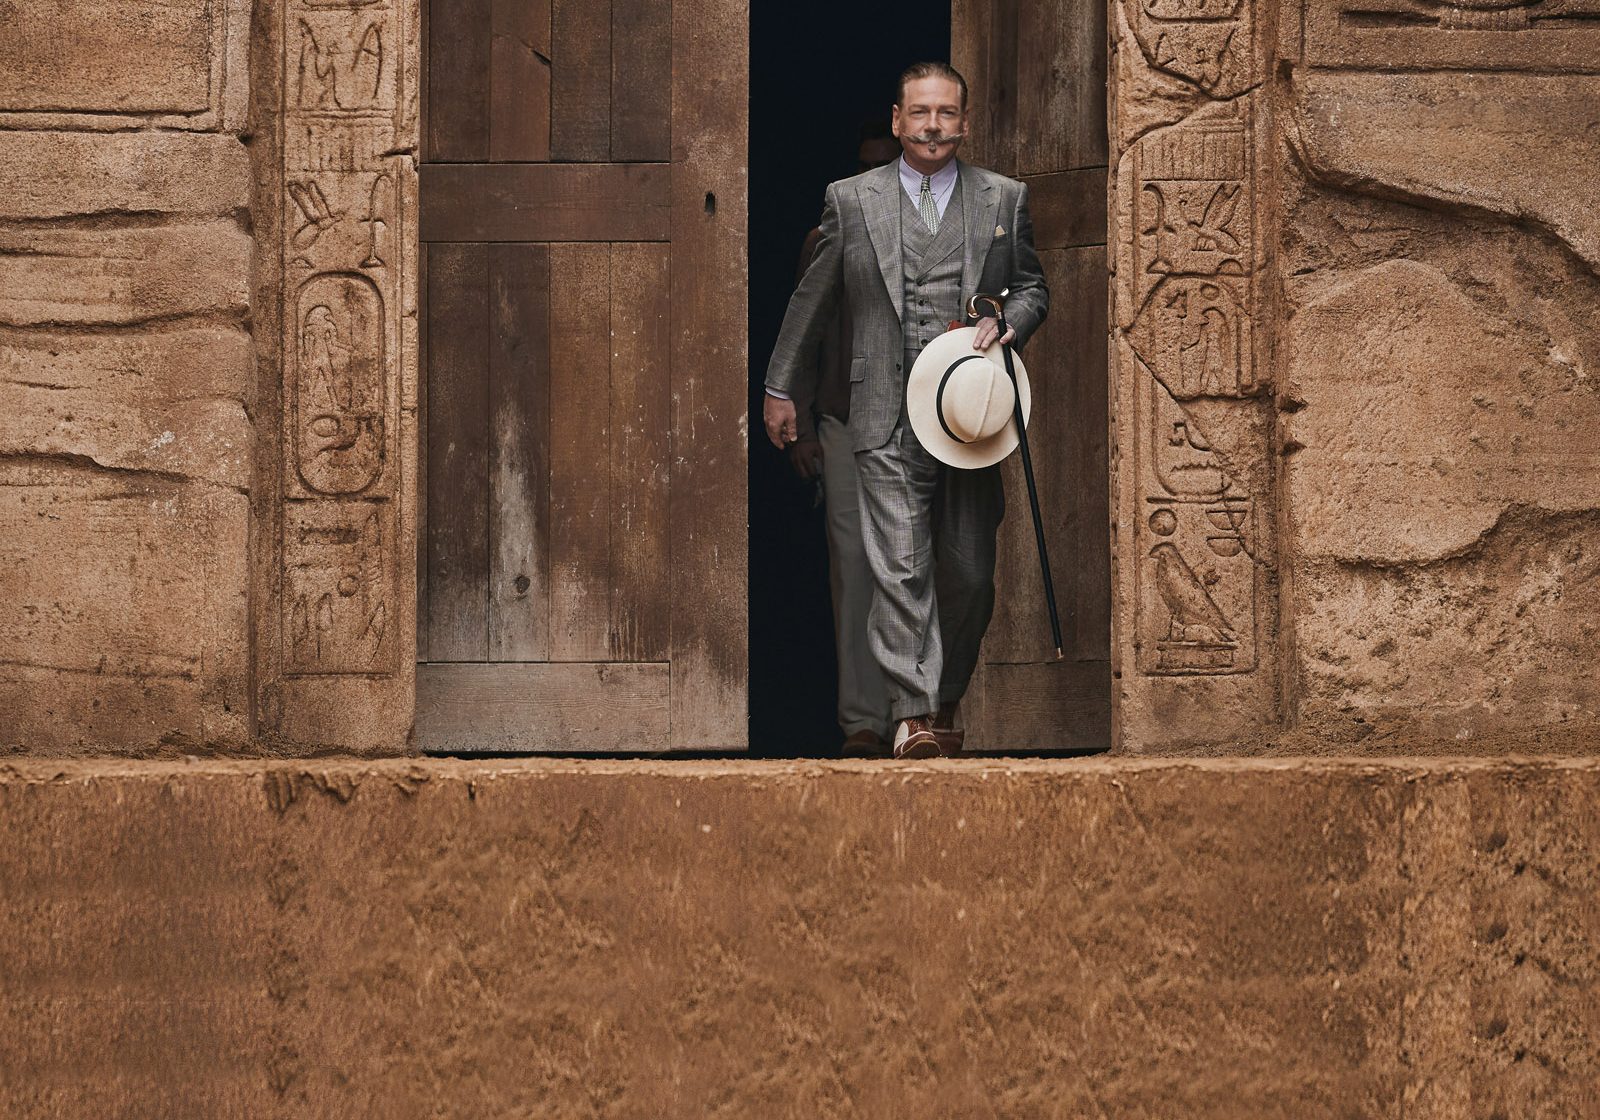 Kenneth Branagh as Hercule Poirot in 20th Century Studios' DEATH ON THE NILE, a mystery-thriller directed by Kenneth Branagh based on Agatha Christie's 1937 novel. Photo by Rob Youngson. © 2020 Twentieth Century Fox Film Corporation. All Rights Reserved.